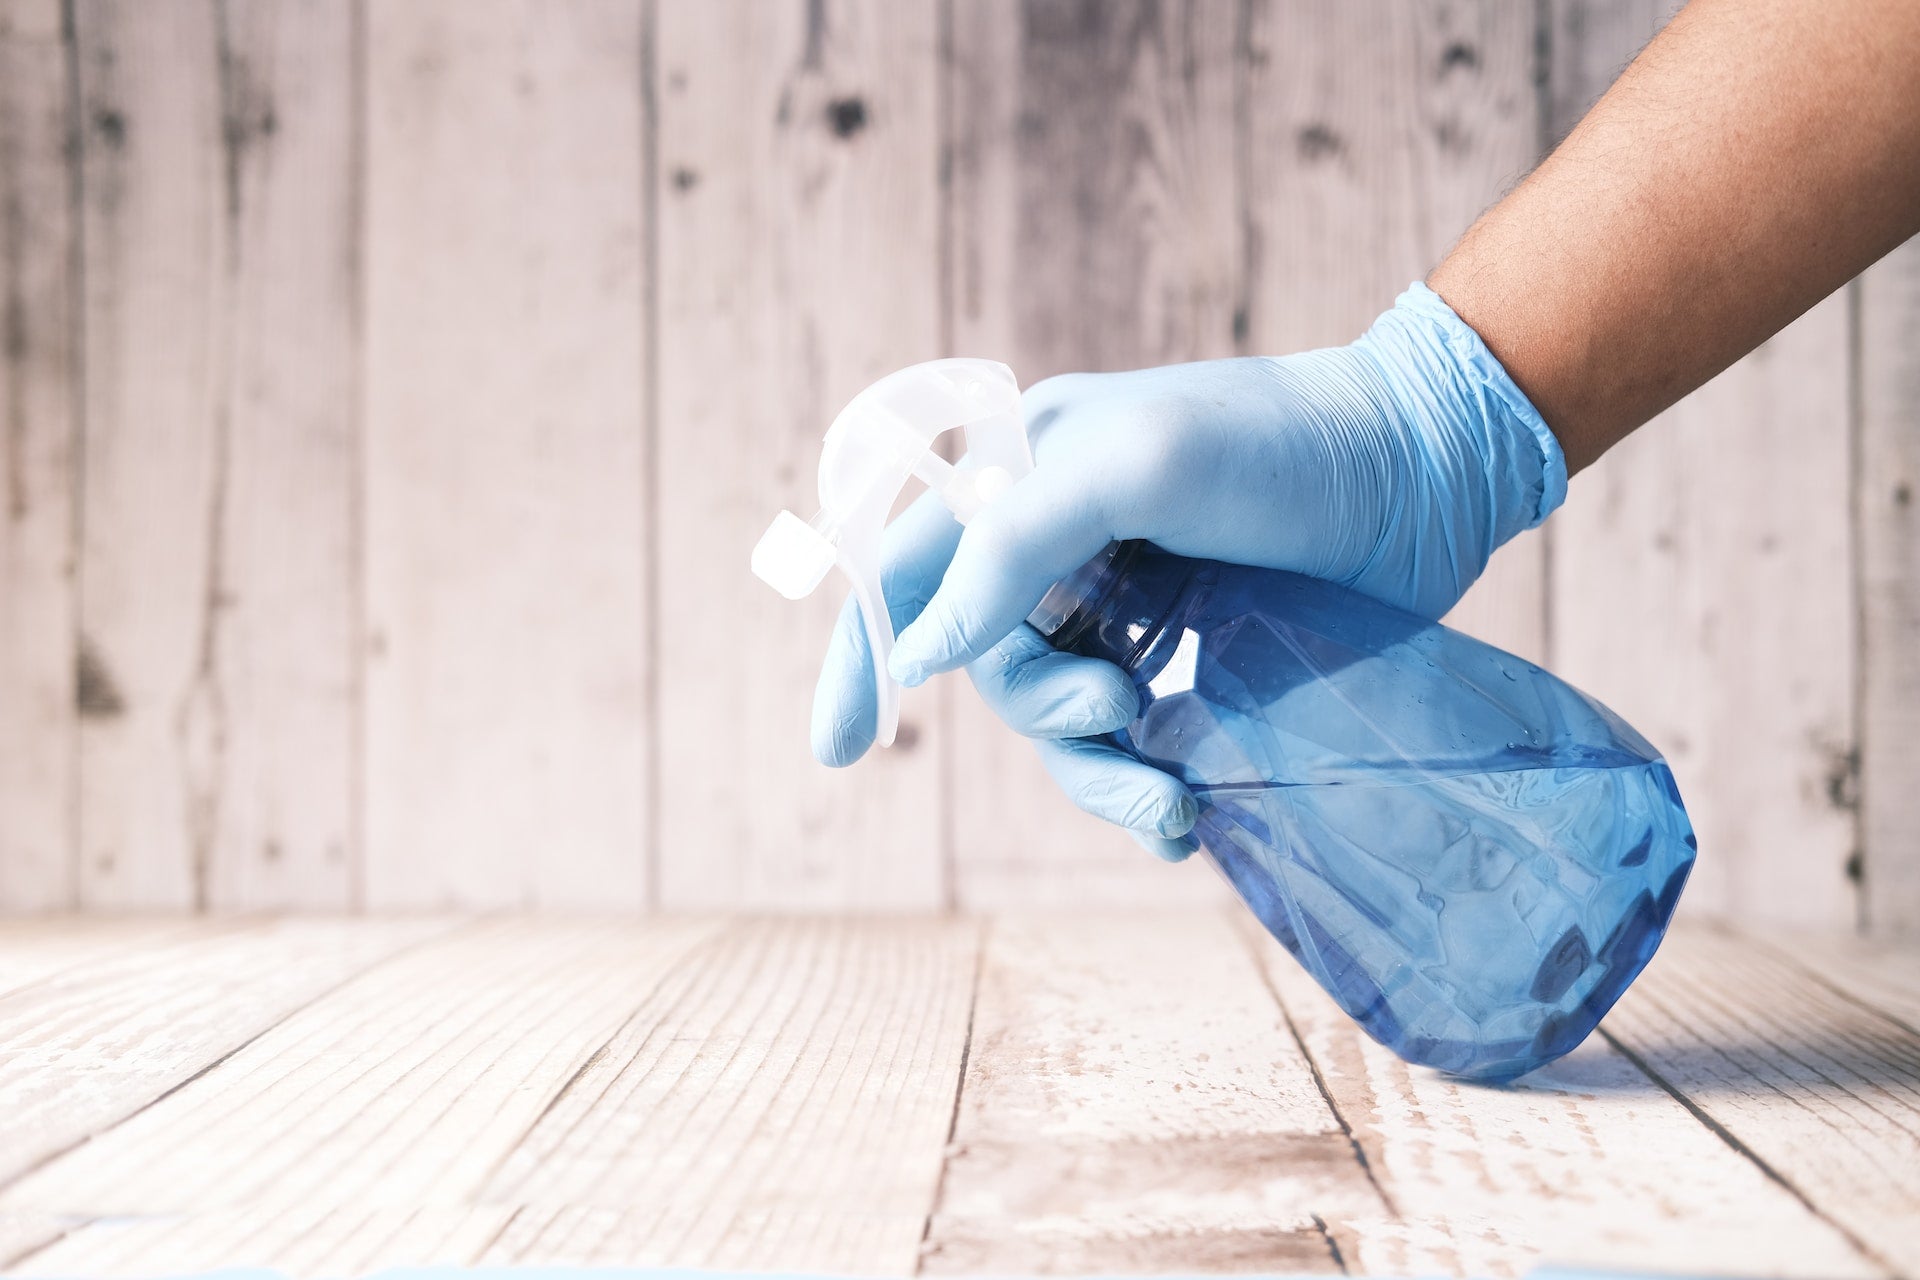 What Is Obsessive and Compulsive Cleaning?